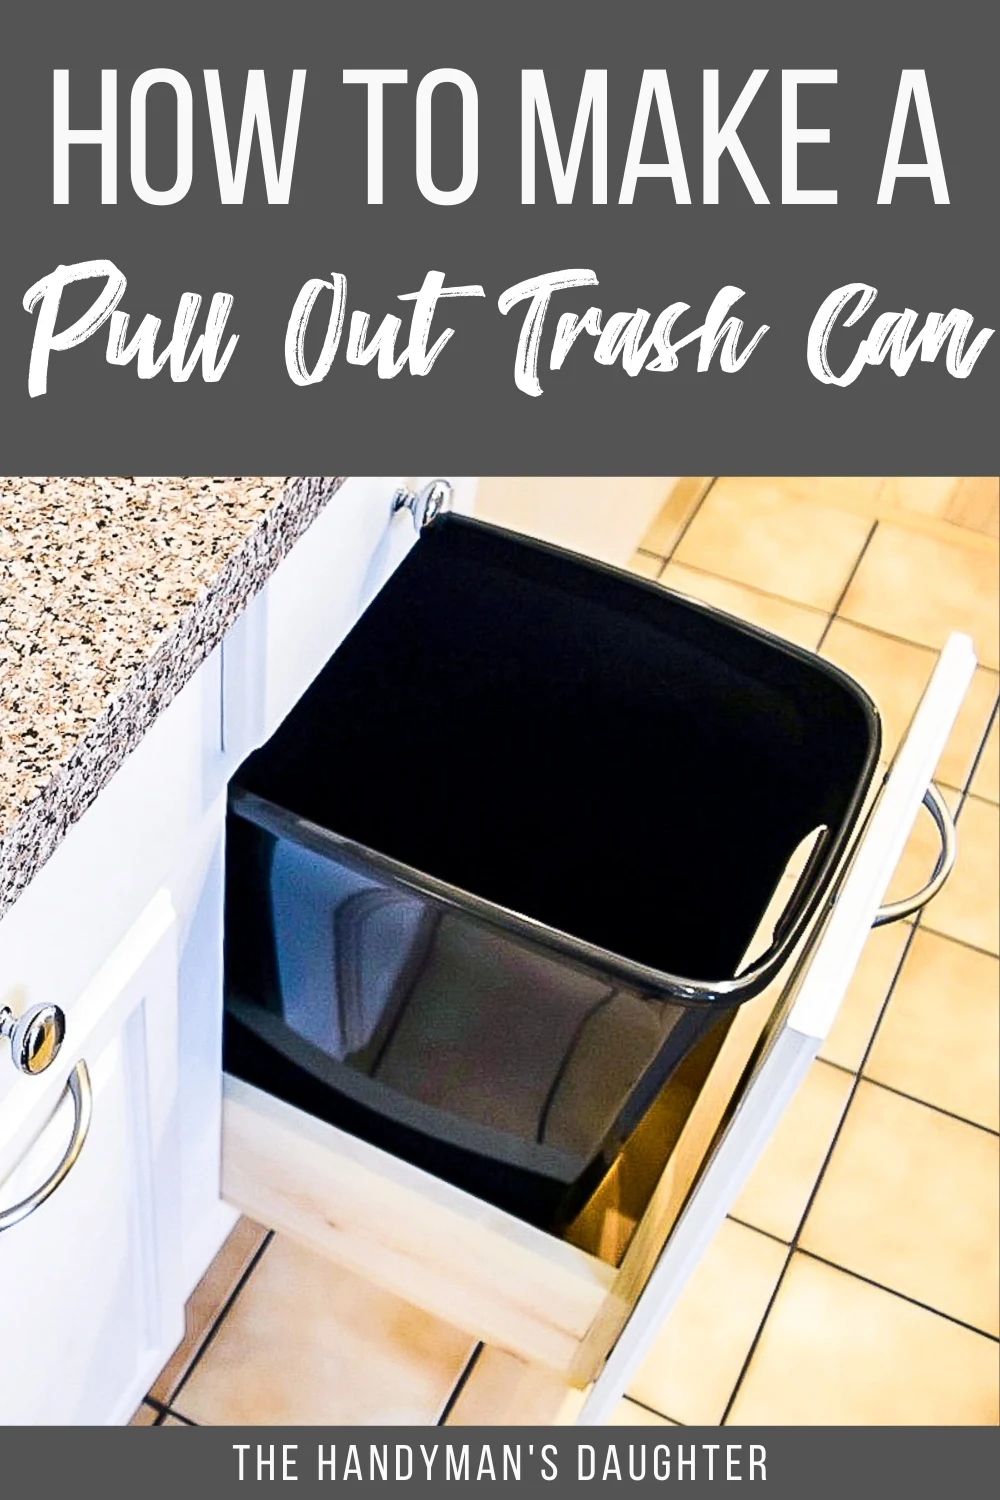 https://www.thehandymansdaughter.com/wp-content/uploads/2021/05/How-to-Make-a-Pull-Out-Trash-Can-Pin-2.jpg.webp